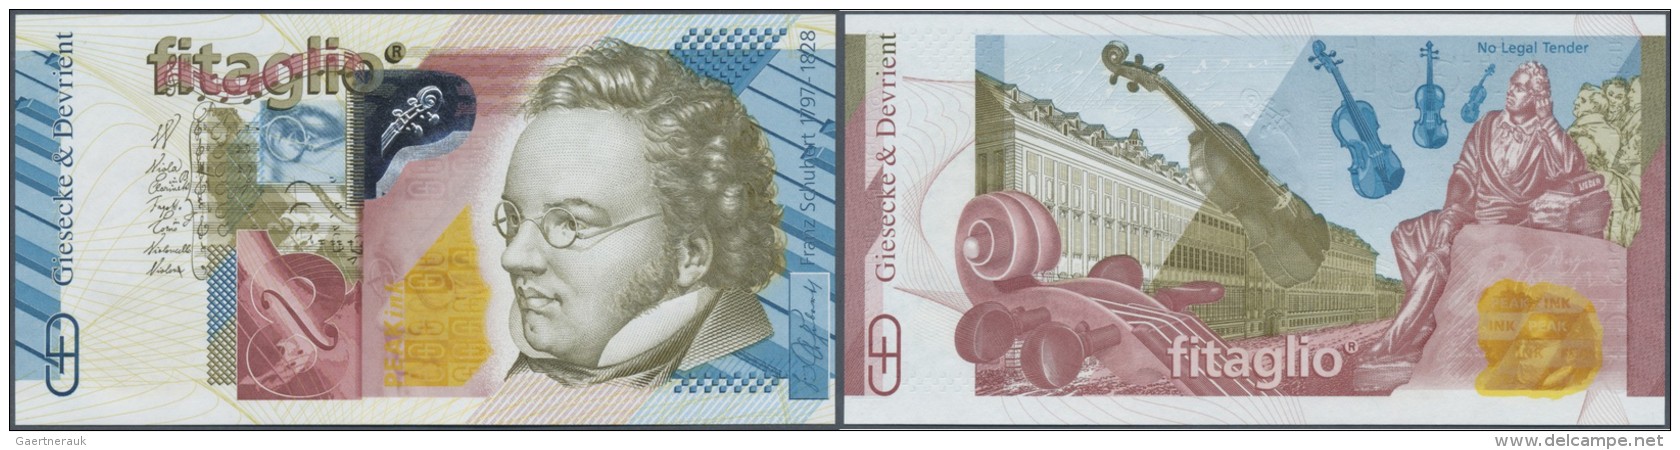 Testbanknoten: Germany: Test Note Produced By Giesecke &amp; Devrient Munich, Called The "Fitaglio" Note Showing A Speci - Fiktive & Specimen